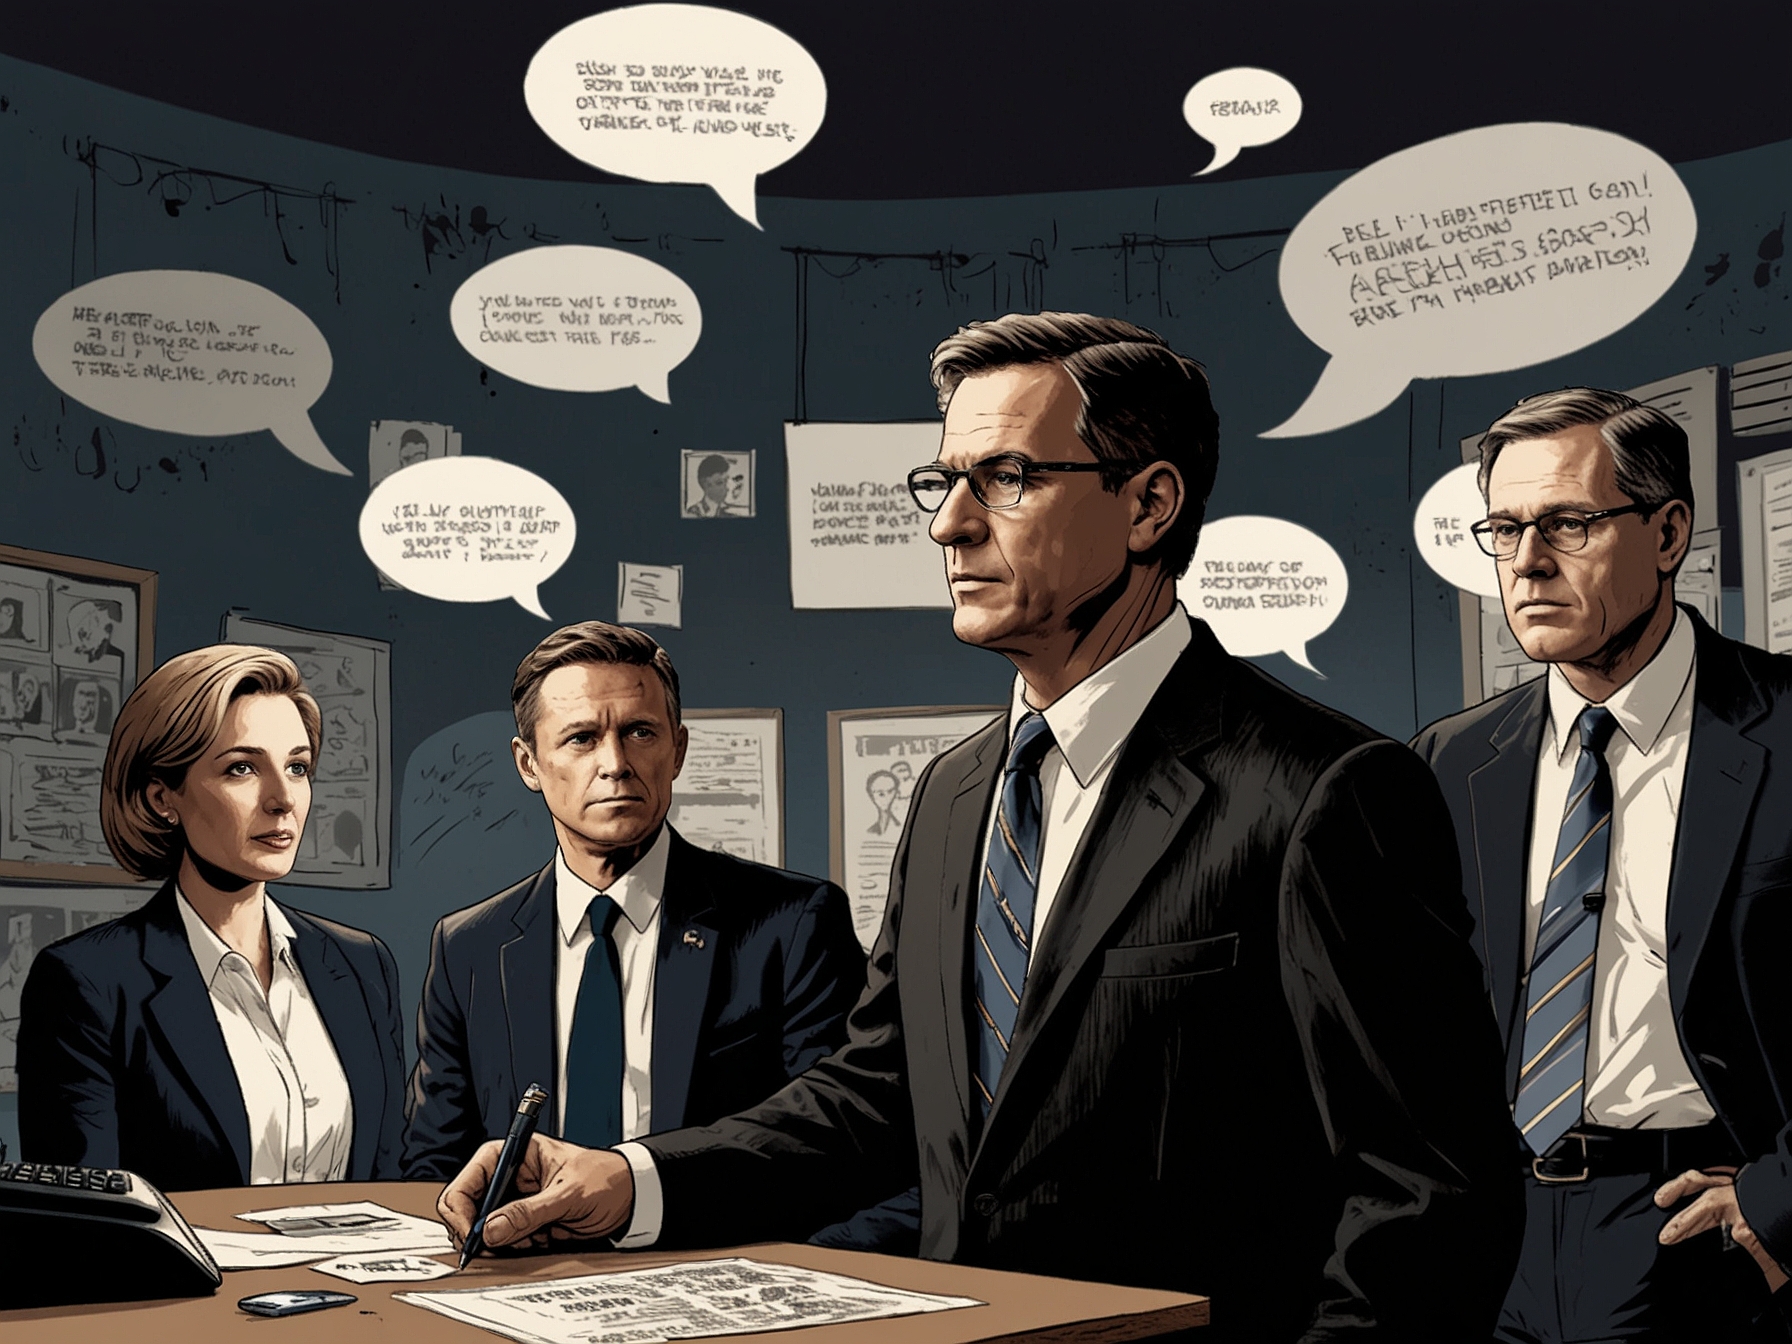 A depiction of FBI agents in action, surrounded by hostile speech bubbles symbolizing the aggressive rhetoric that has escalated due to recent judicial decisions and Trump's statements.